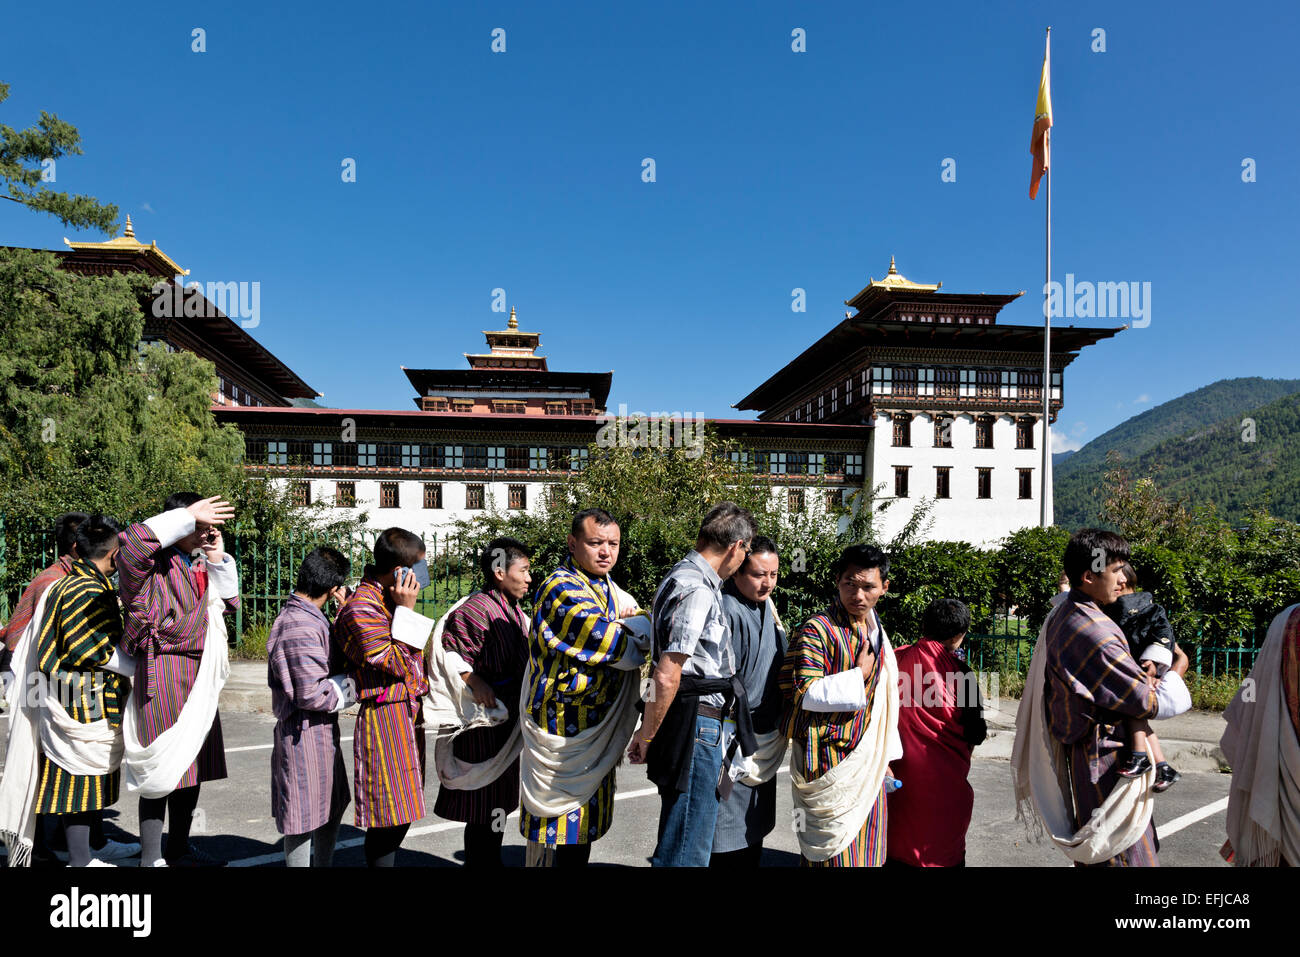 BHUTAN - The men's line patiently waiting in traditional dress, (ghos), to pass through the security checkpoint for festival. Stock Photo